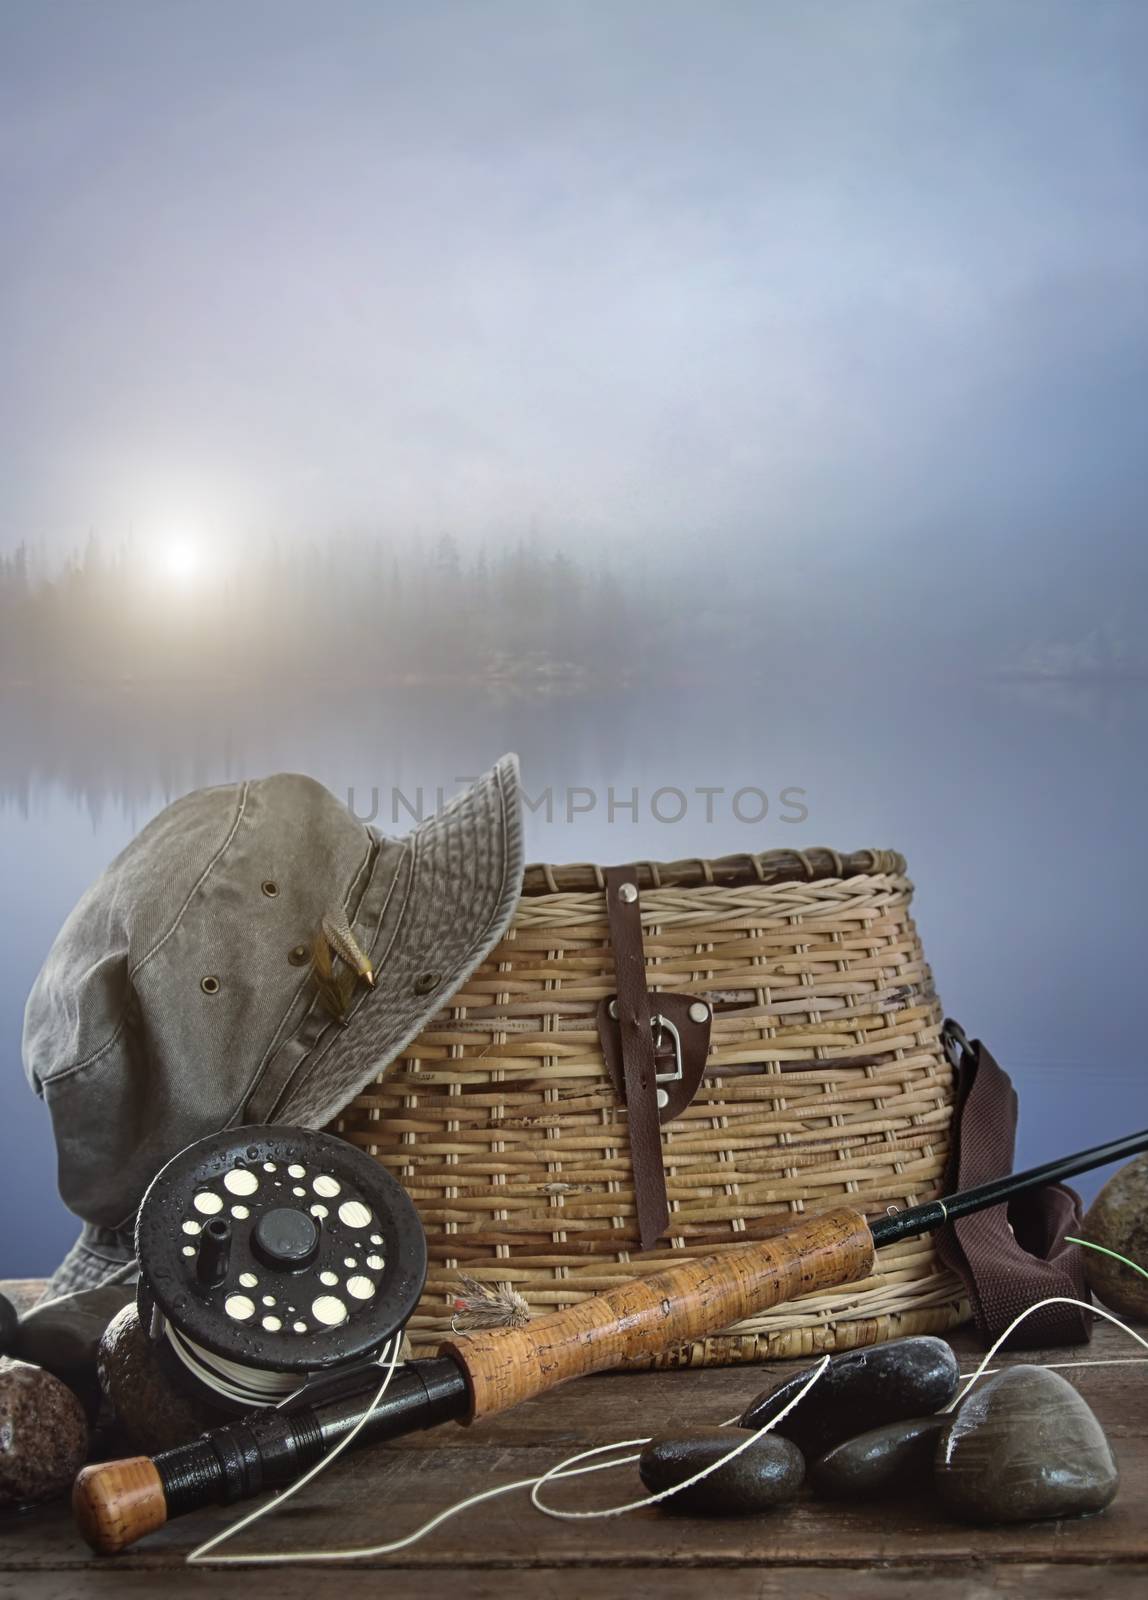 Fly rod with creel and equipment on wood by Sandralise